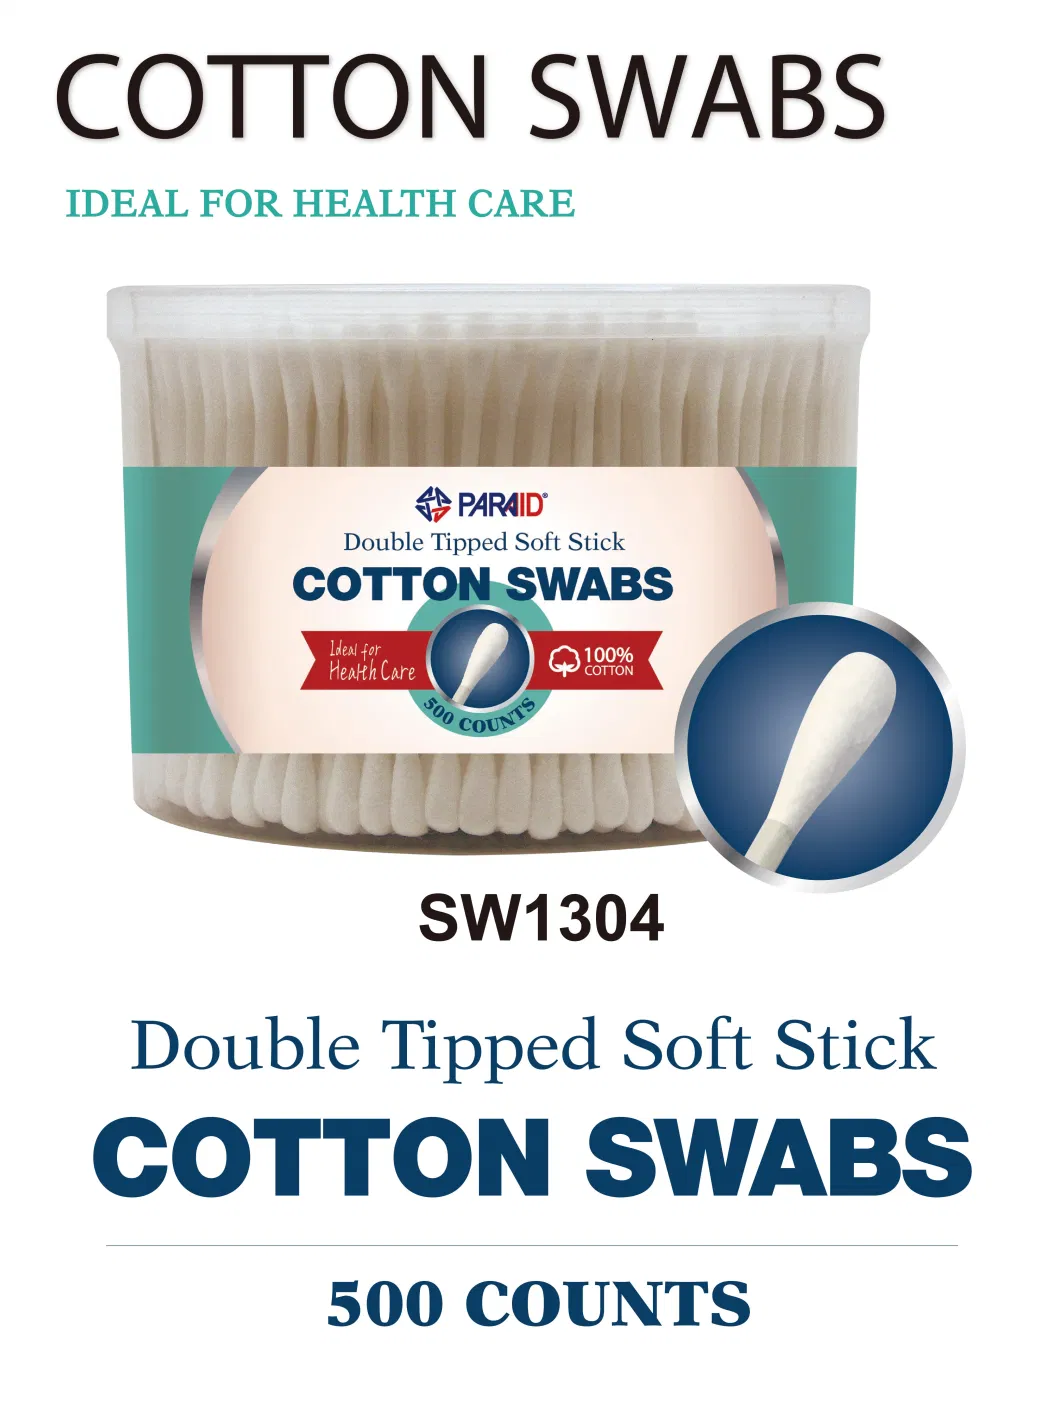 Soft Tip Cotton Swabs for Gentle Cleaning, Model No.: Sw1304, One Size Fits All, Customizable Color